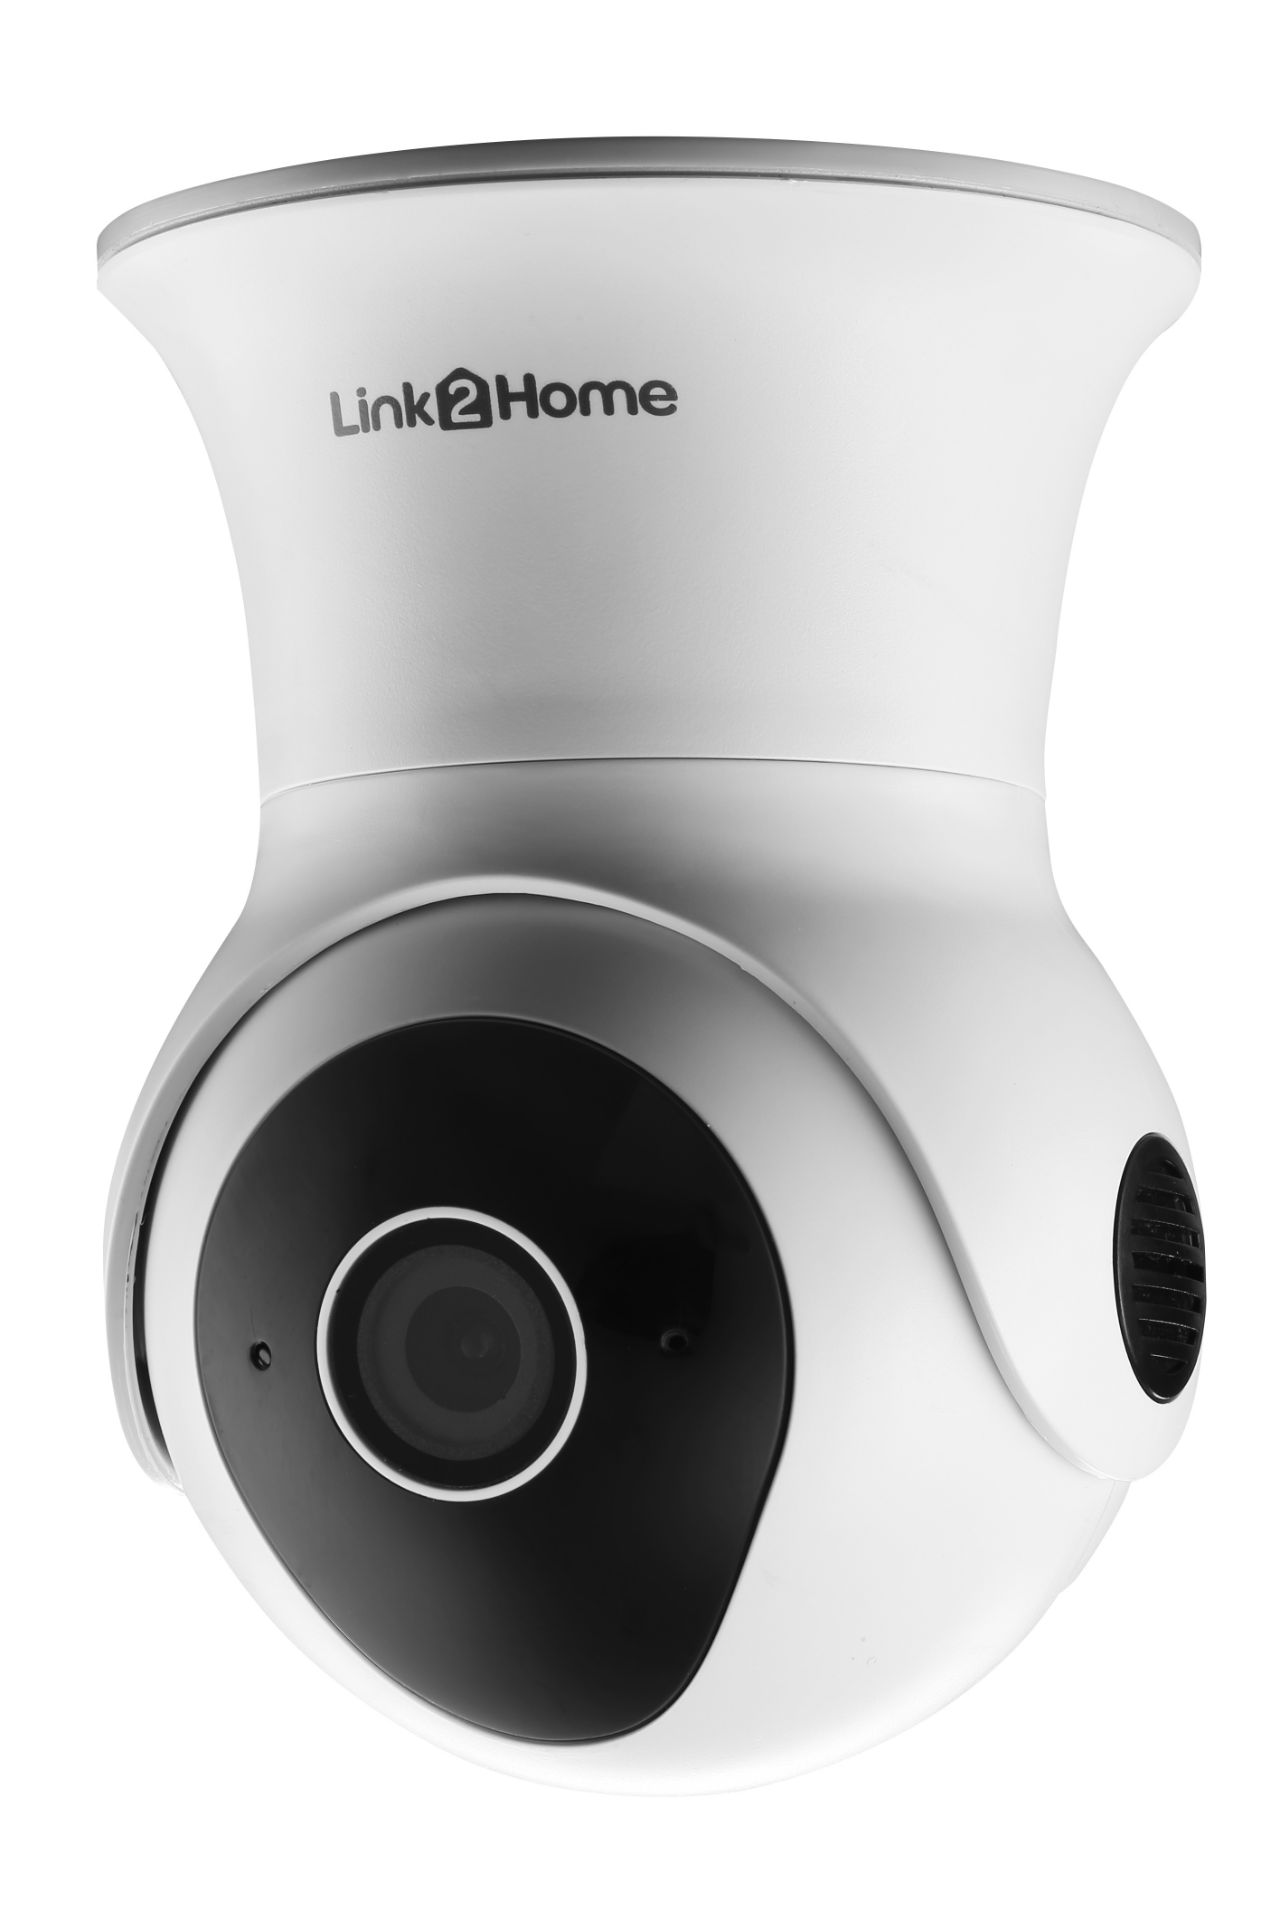 A Link2Home 'L2H-ODRCameraP/T' External Weatherproof Wi-Fi Camera with Pan and Tilt Operation - New, - Image 4 of 14